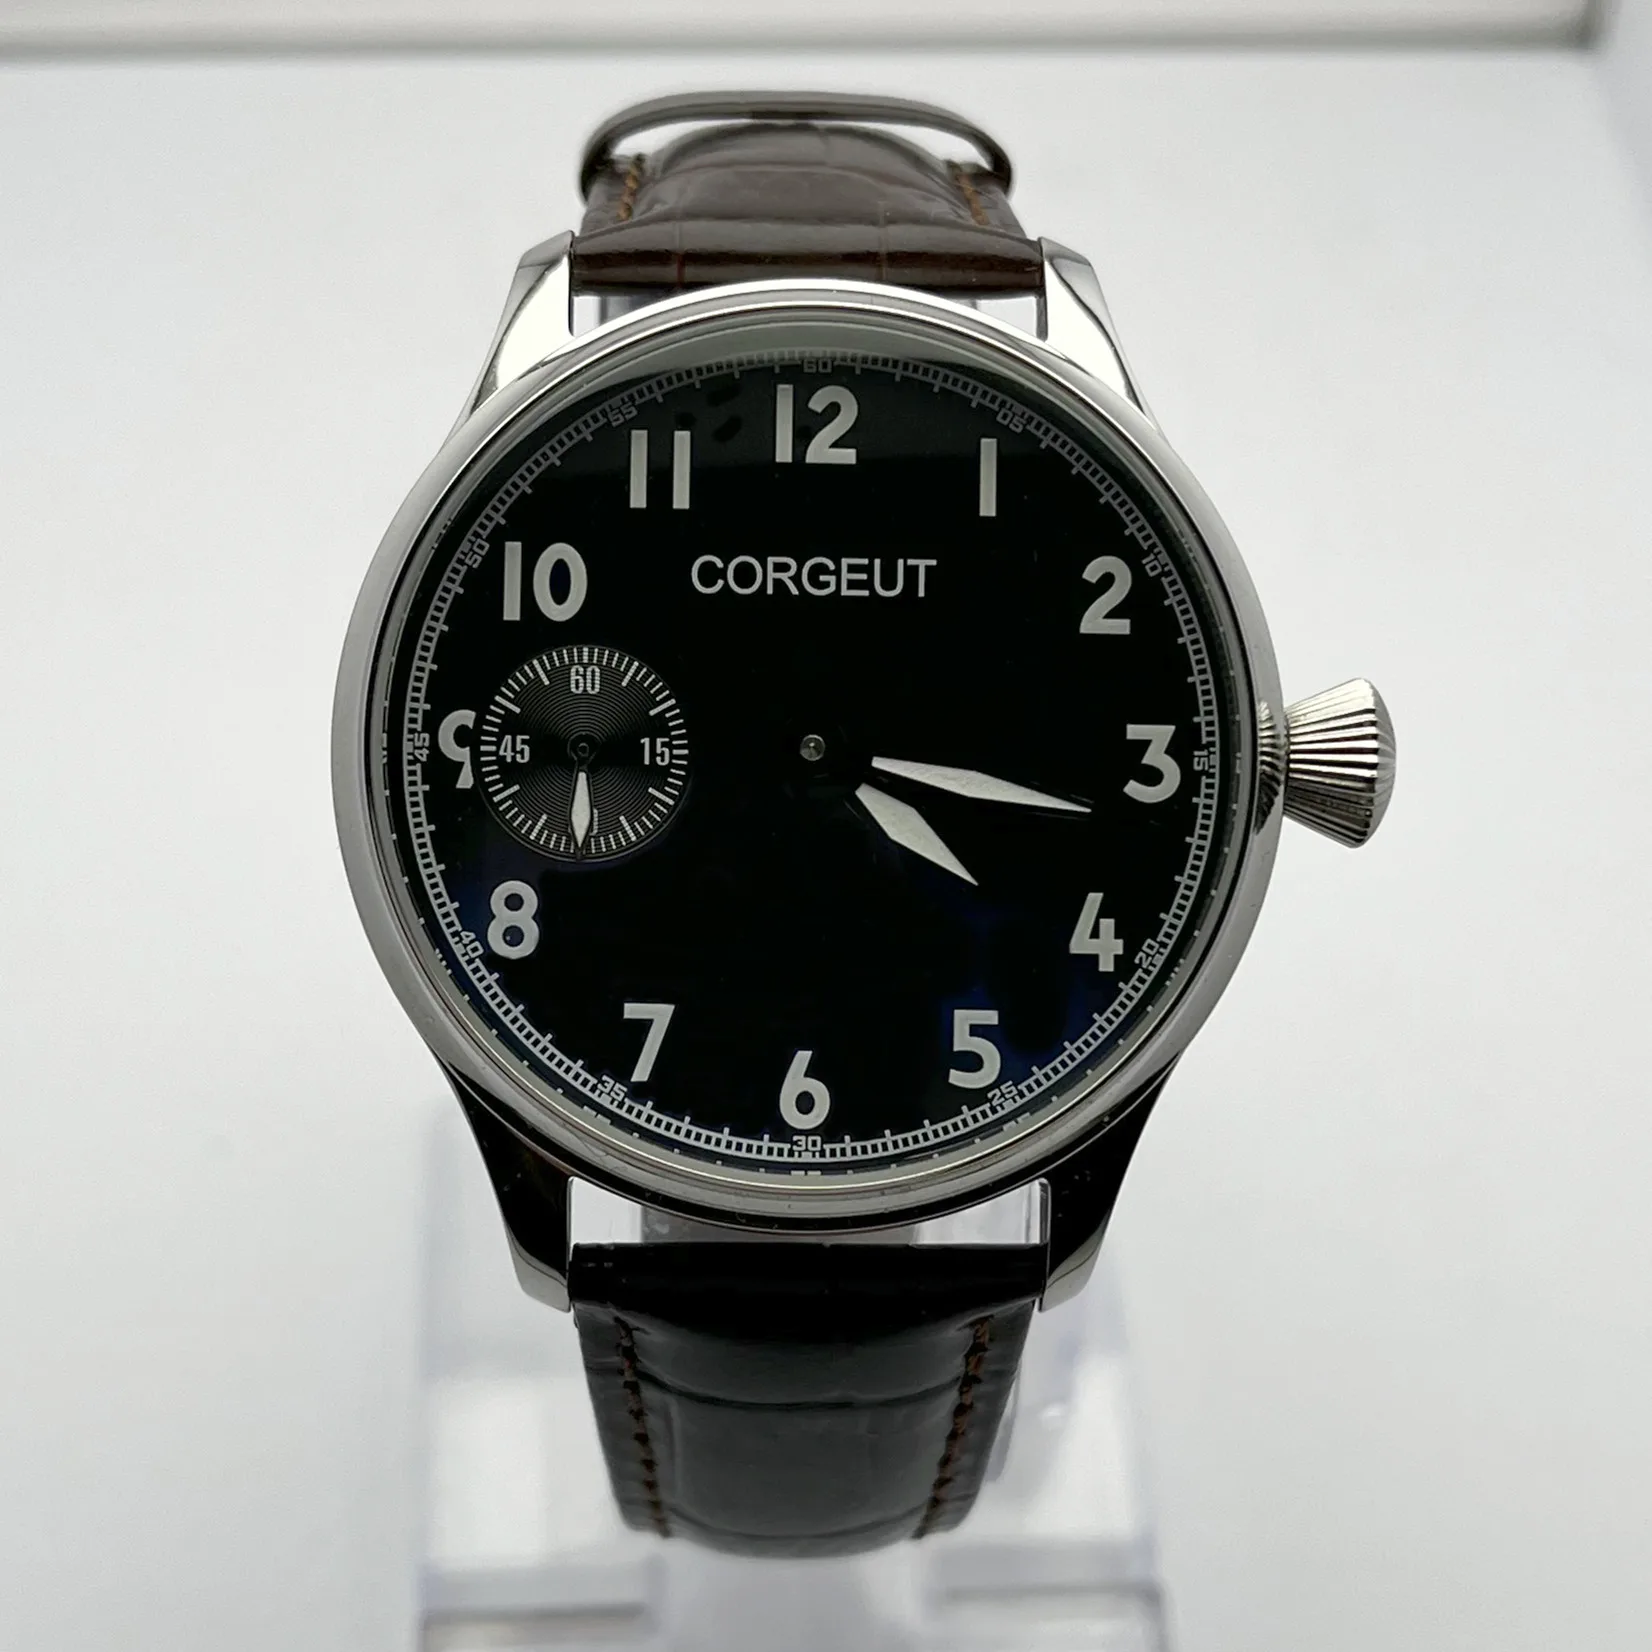 New 44MM Corgeut Men Watch Seagull ST36 Manual Winding Movement Stainless Steel Case Luminous Dial And Hands